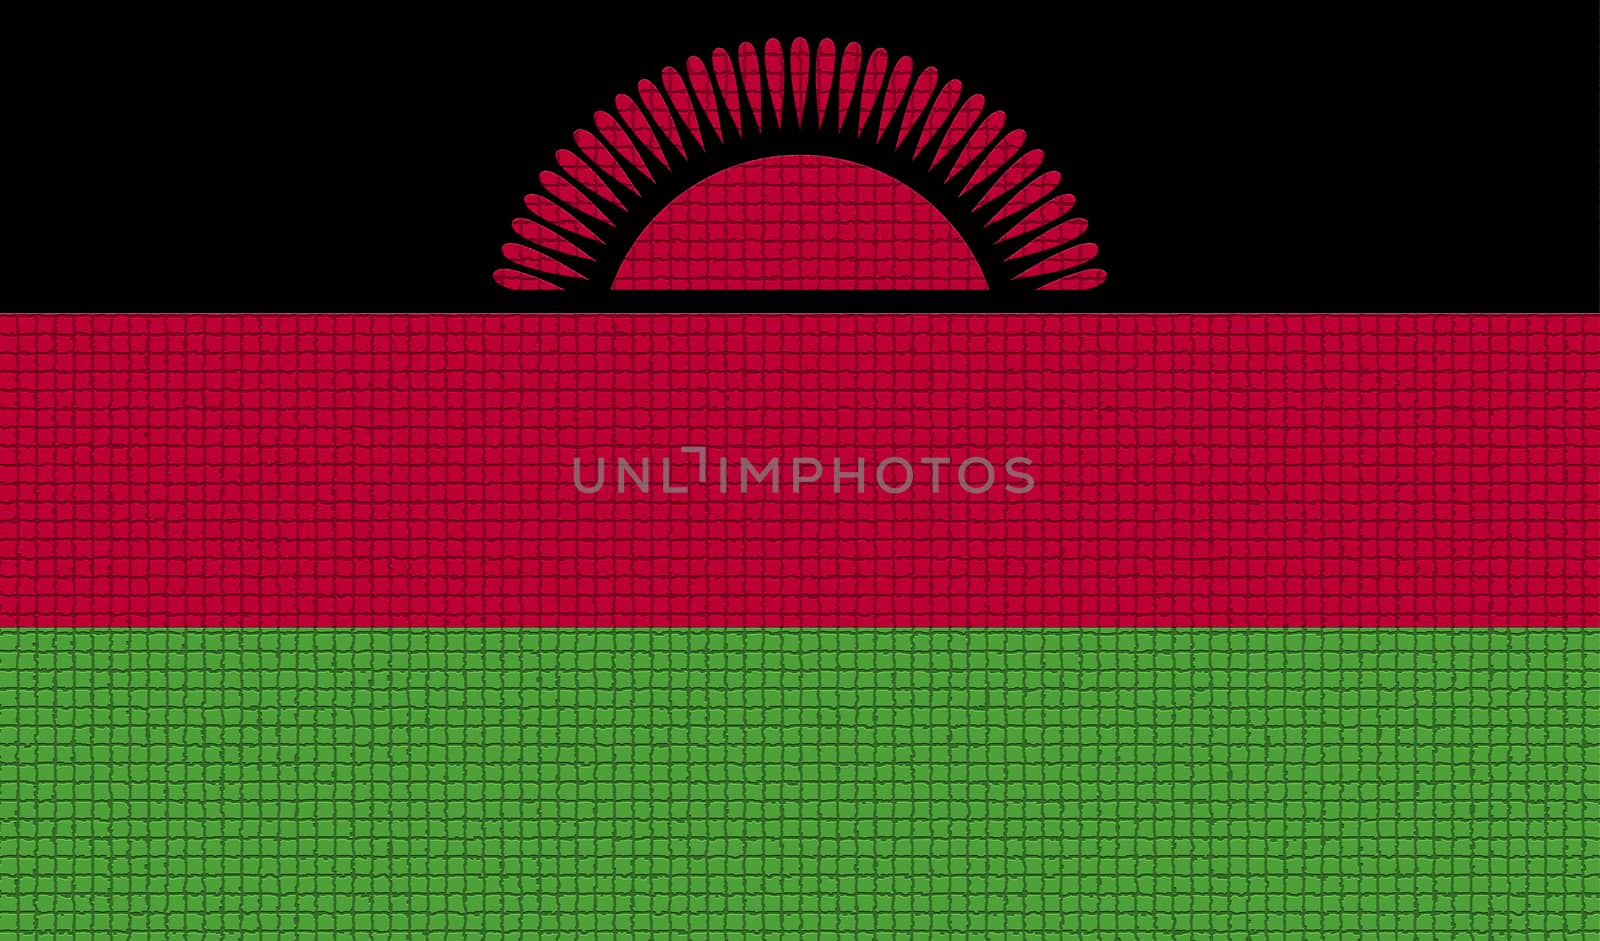 Flags of Malawi with abstract textures. Rasterized version